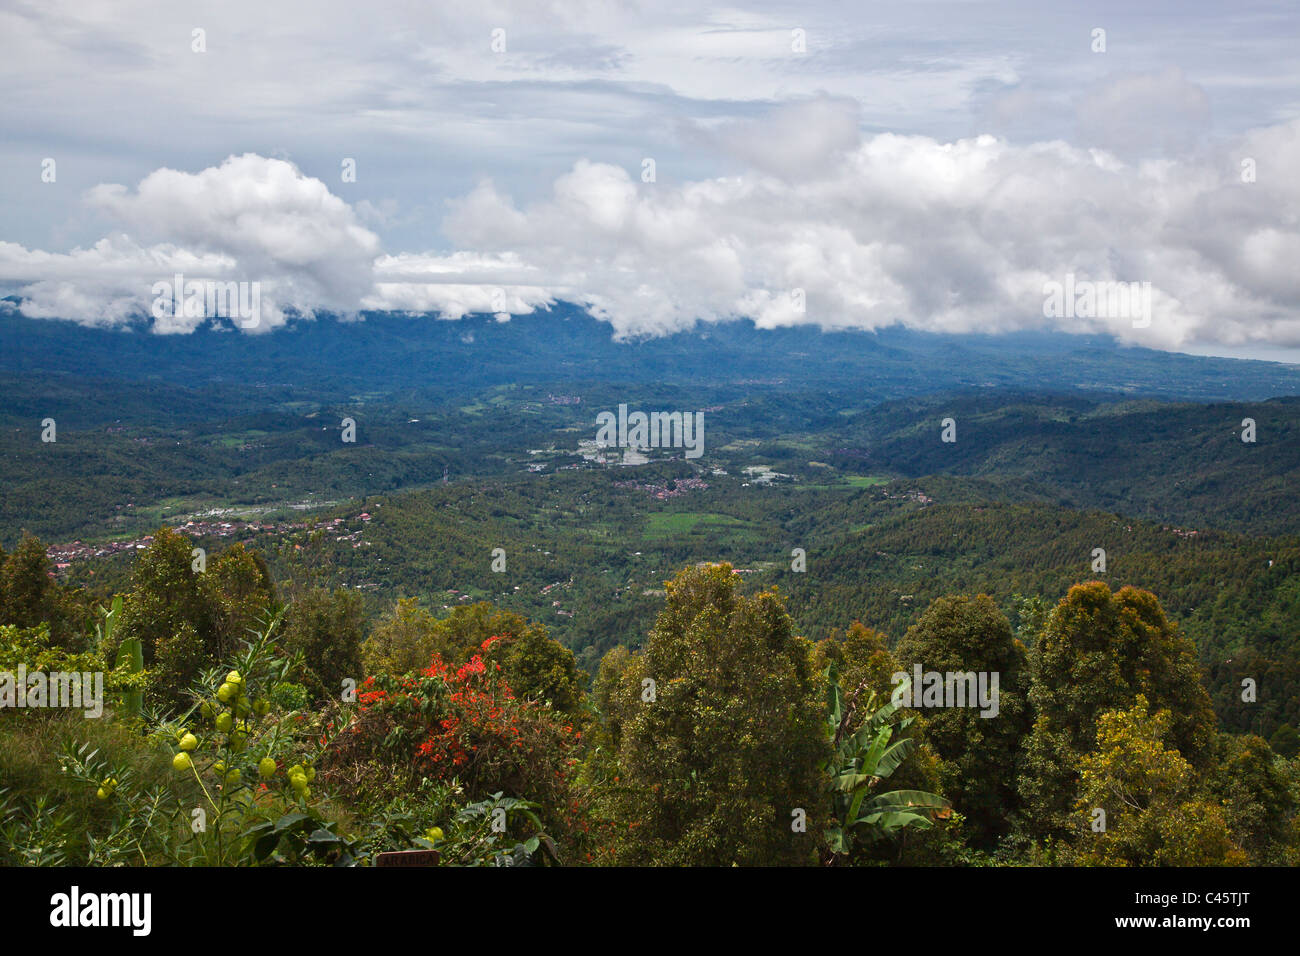 View of MUNDUK north of the DANAU BRATAN AREA in the central highlands - BALI, INDONESIA Stock Photo